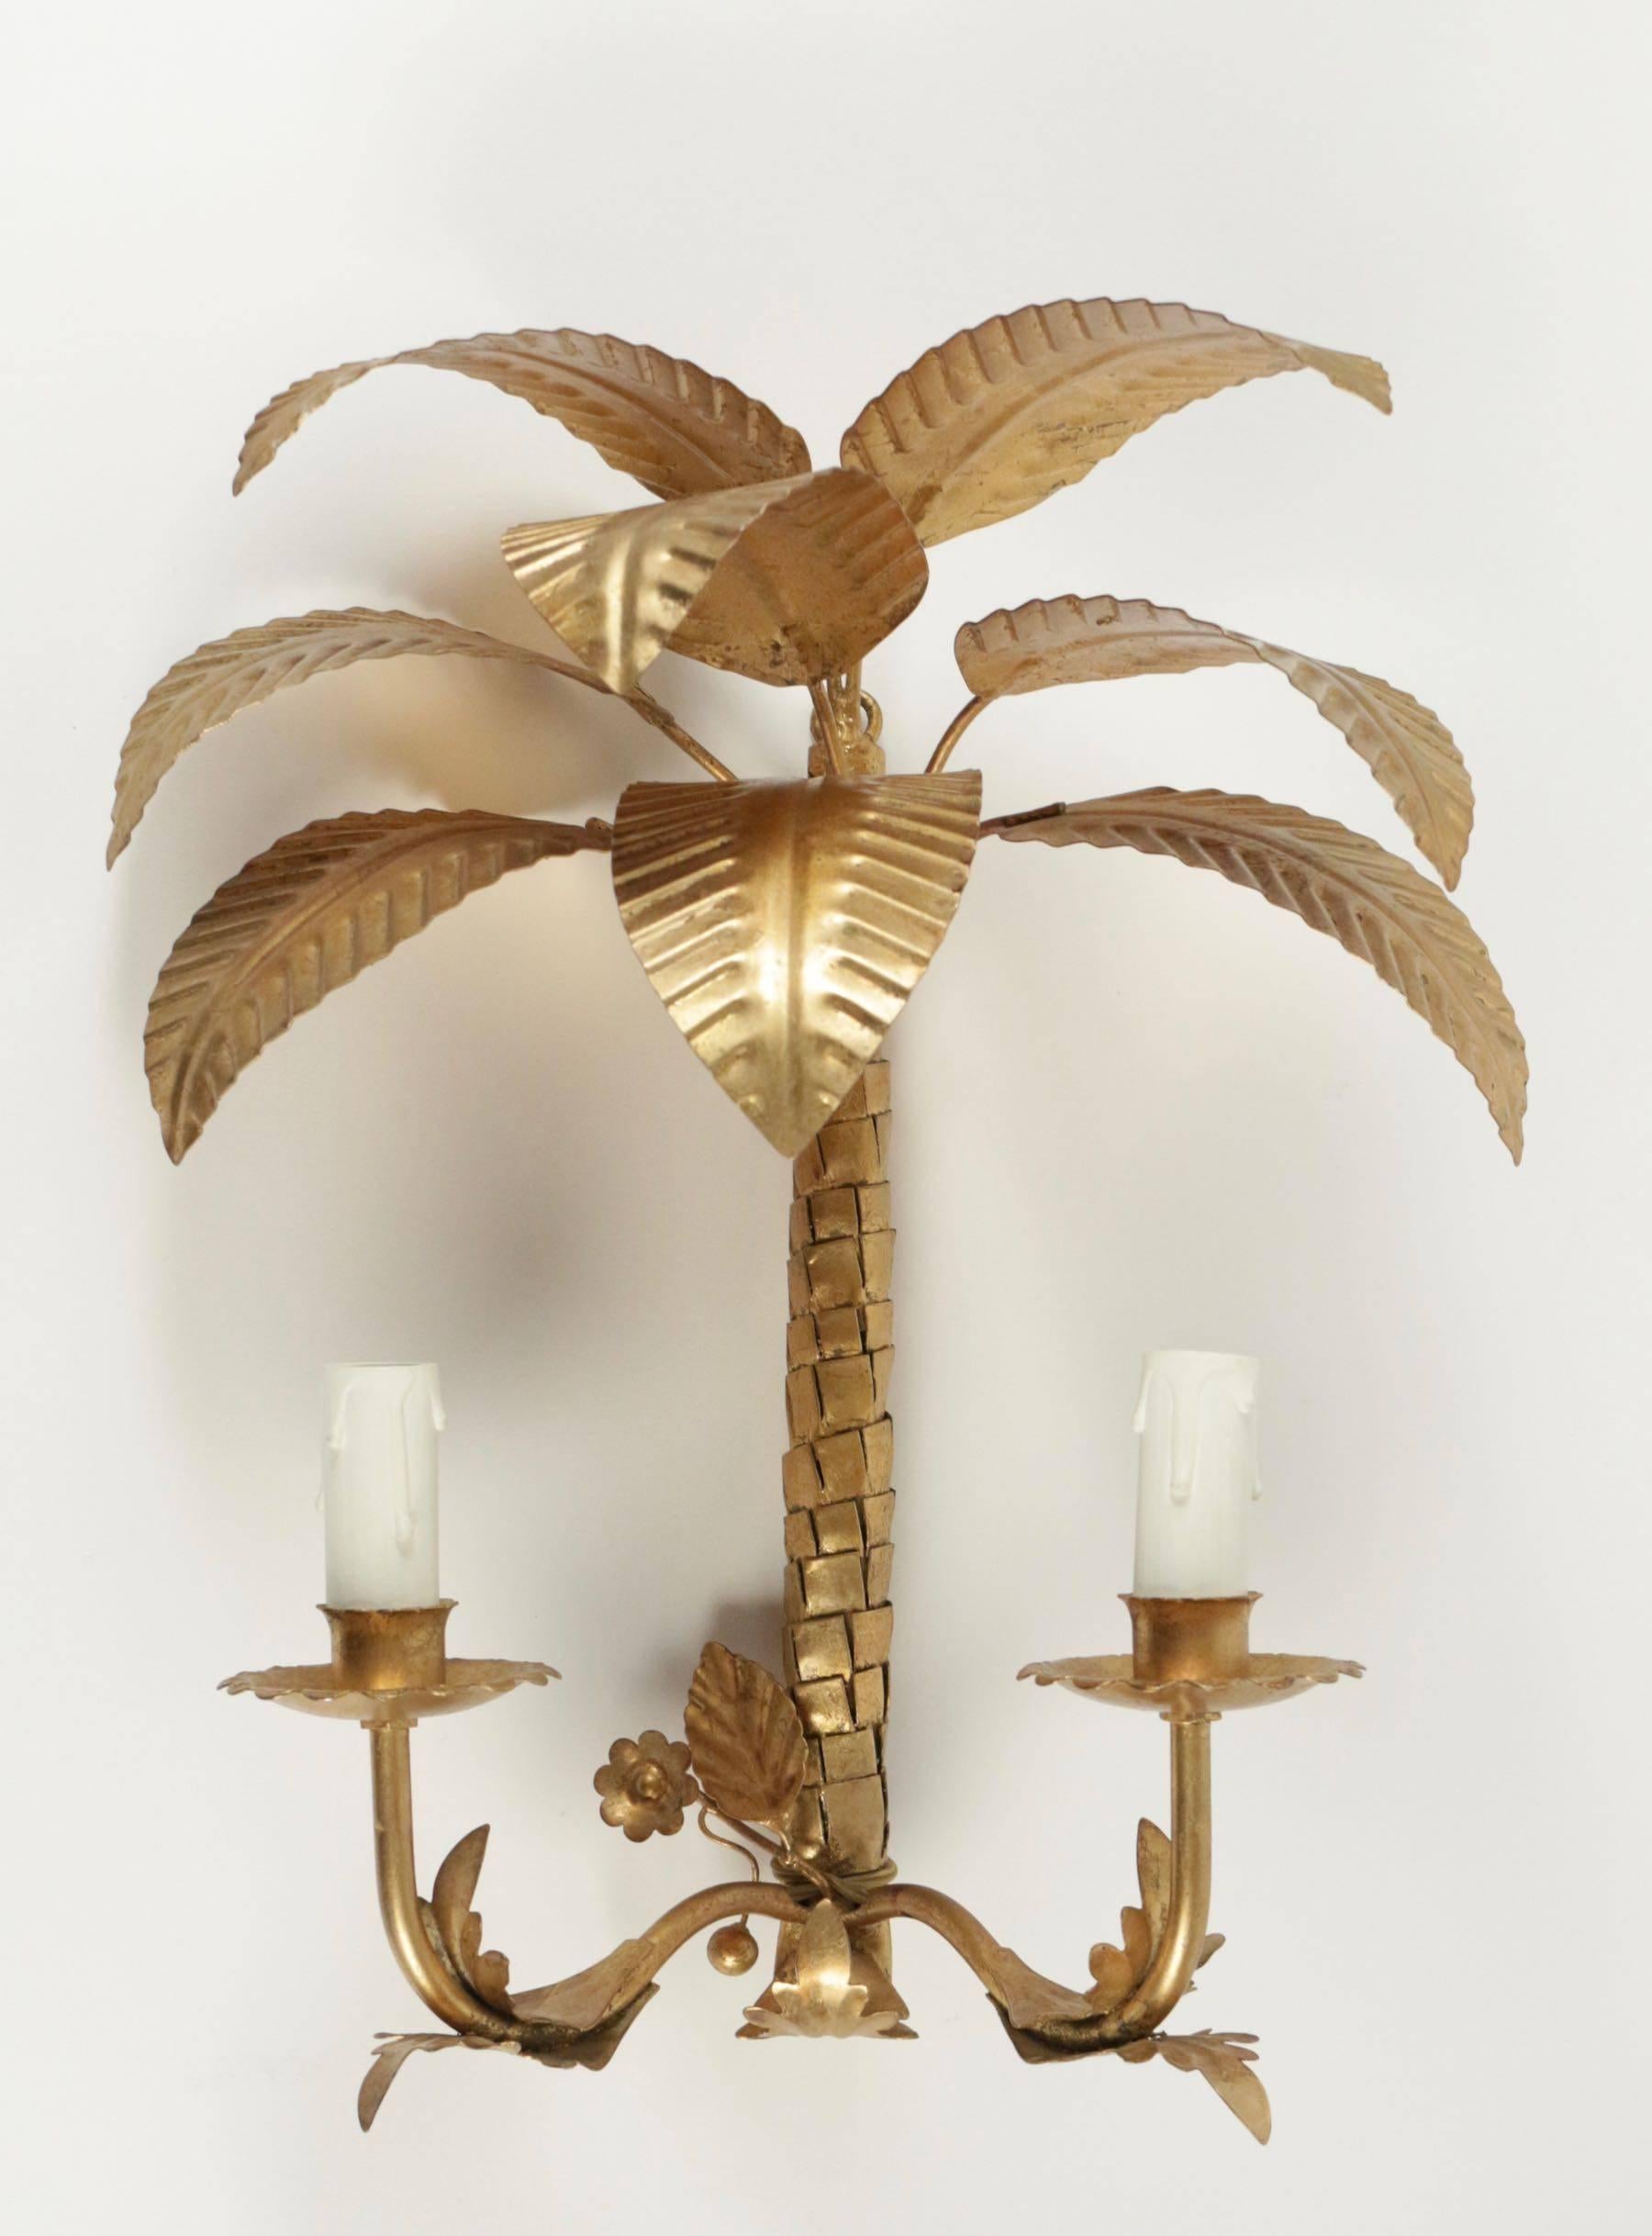 1960s set of three palm leaves sconces Maison FlorArt.

The sconce are made of gilded metal.
Eight palm leaves, textured palm trunk 
Two lighted arms.